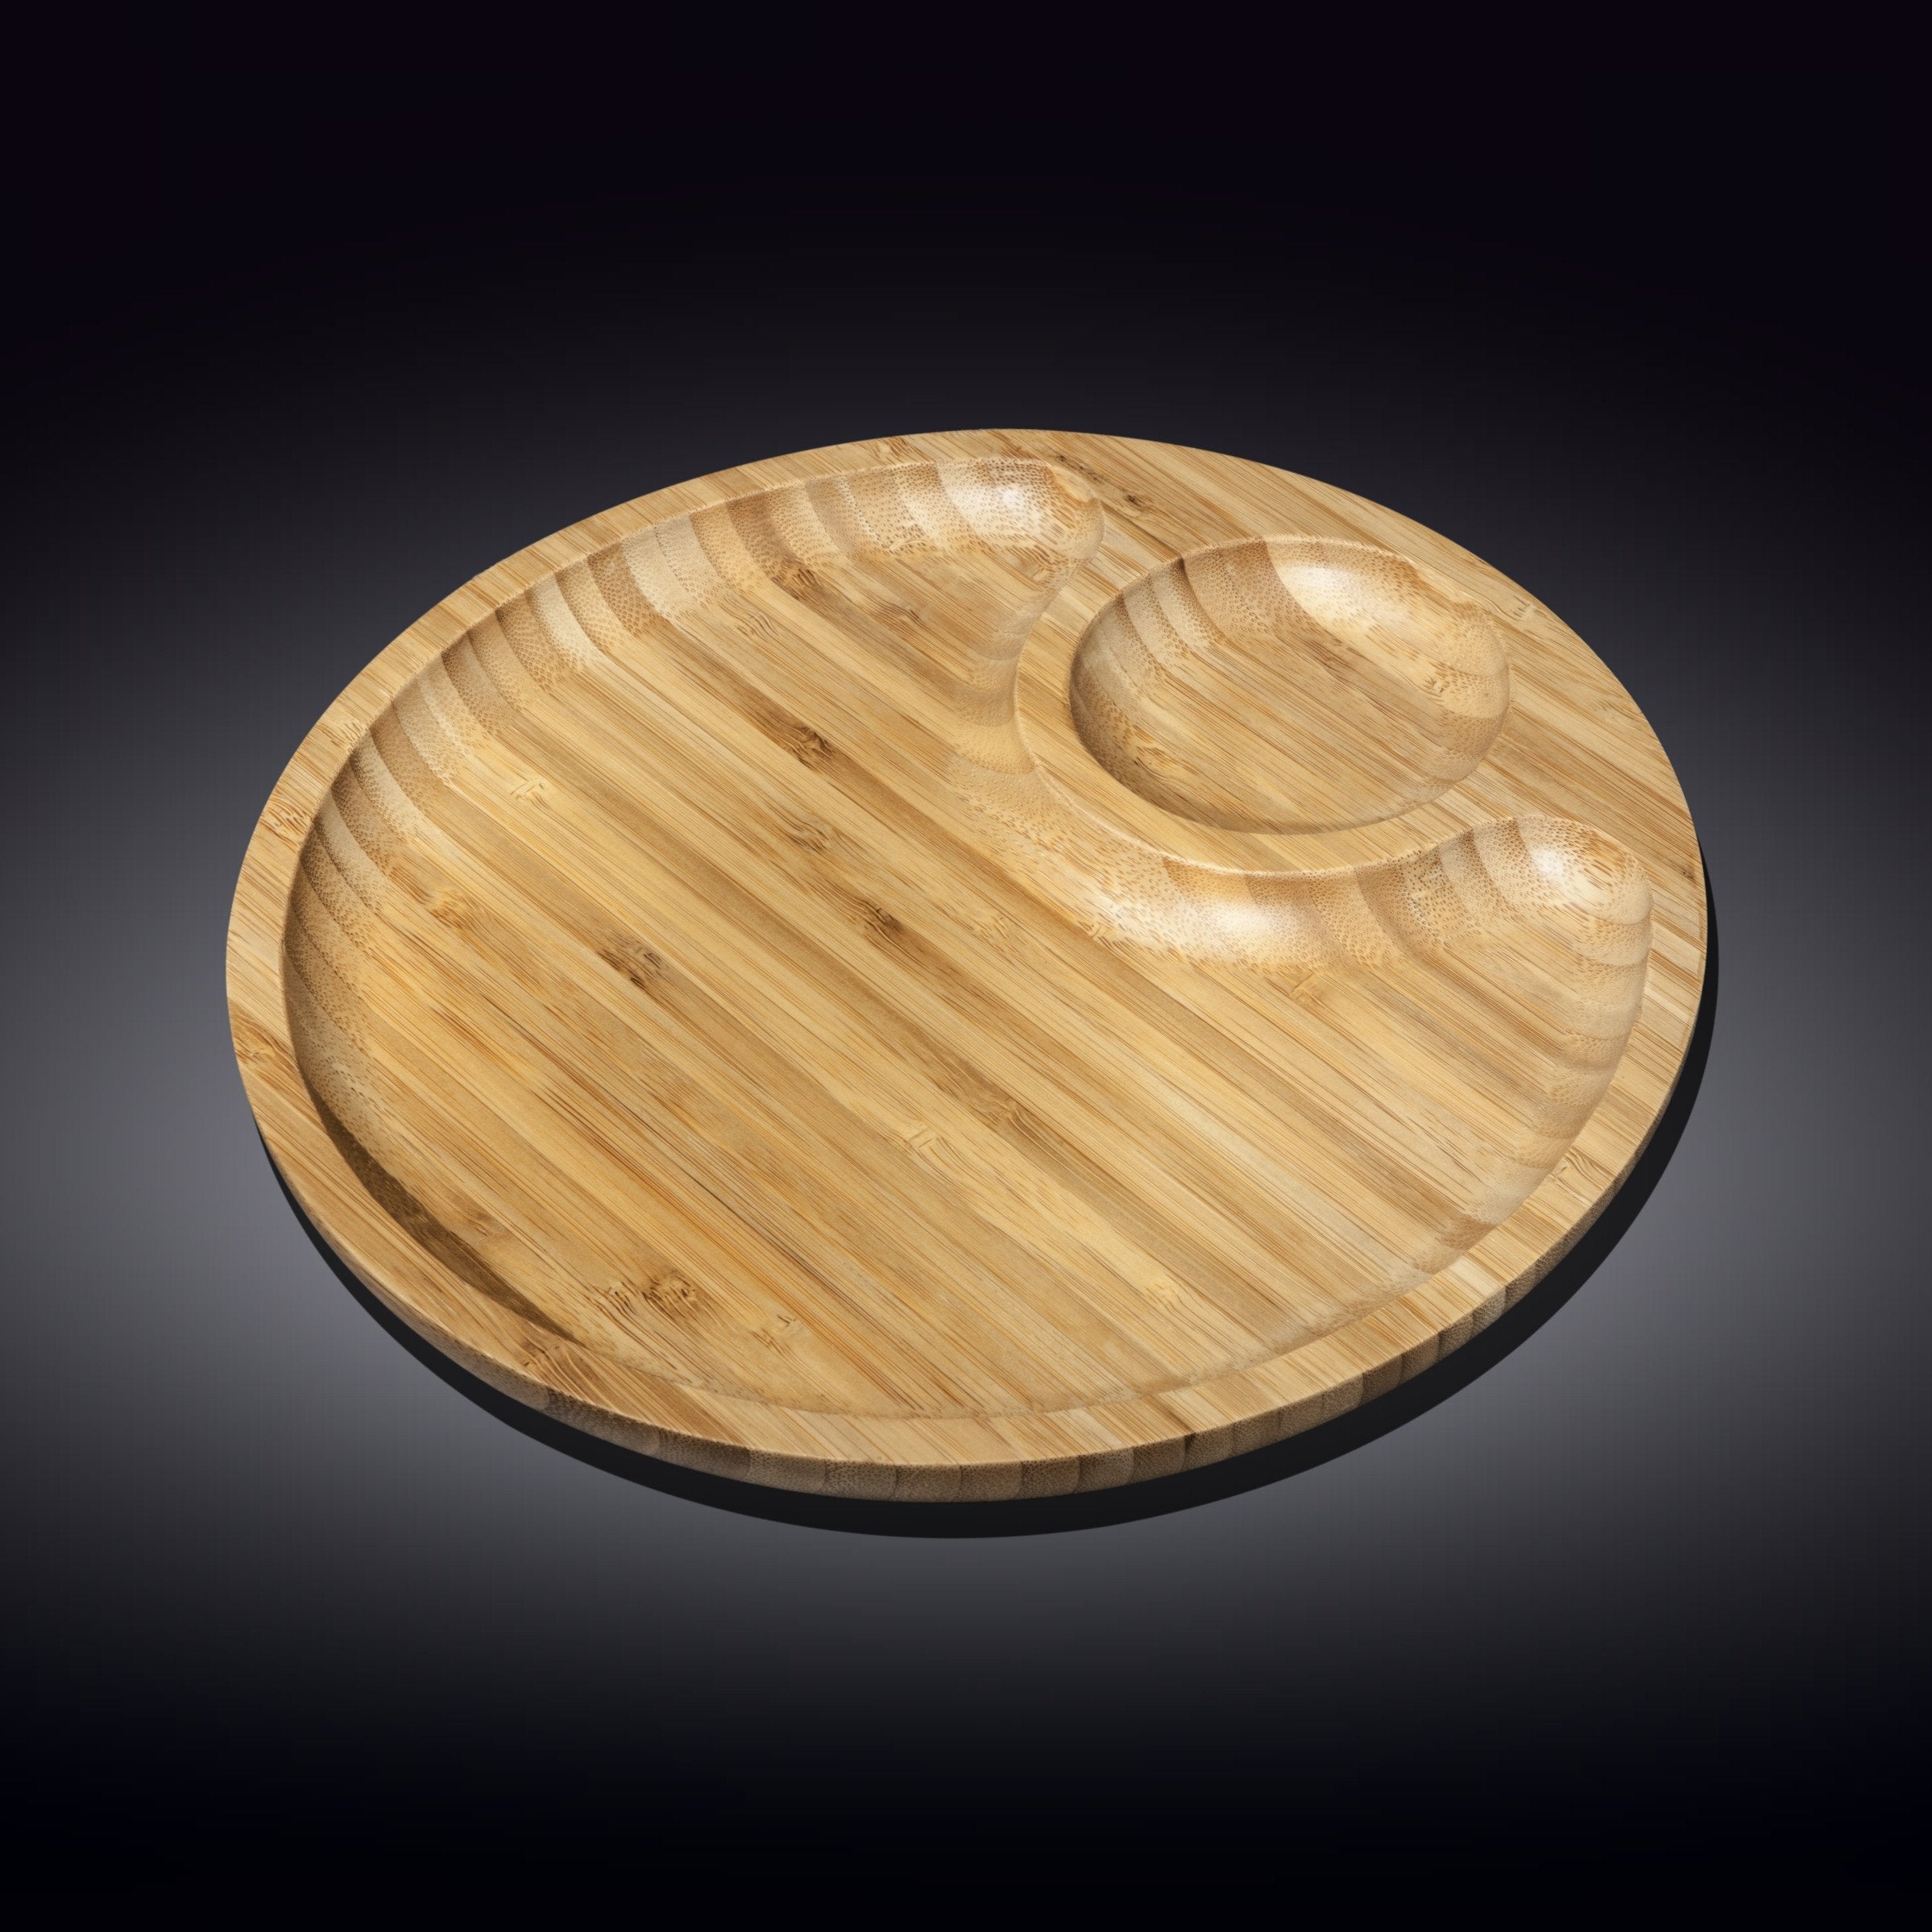 Set of 6 Natural Bamboo 2 Section Platters 10"